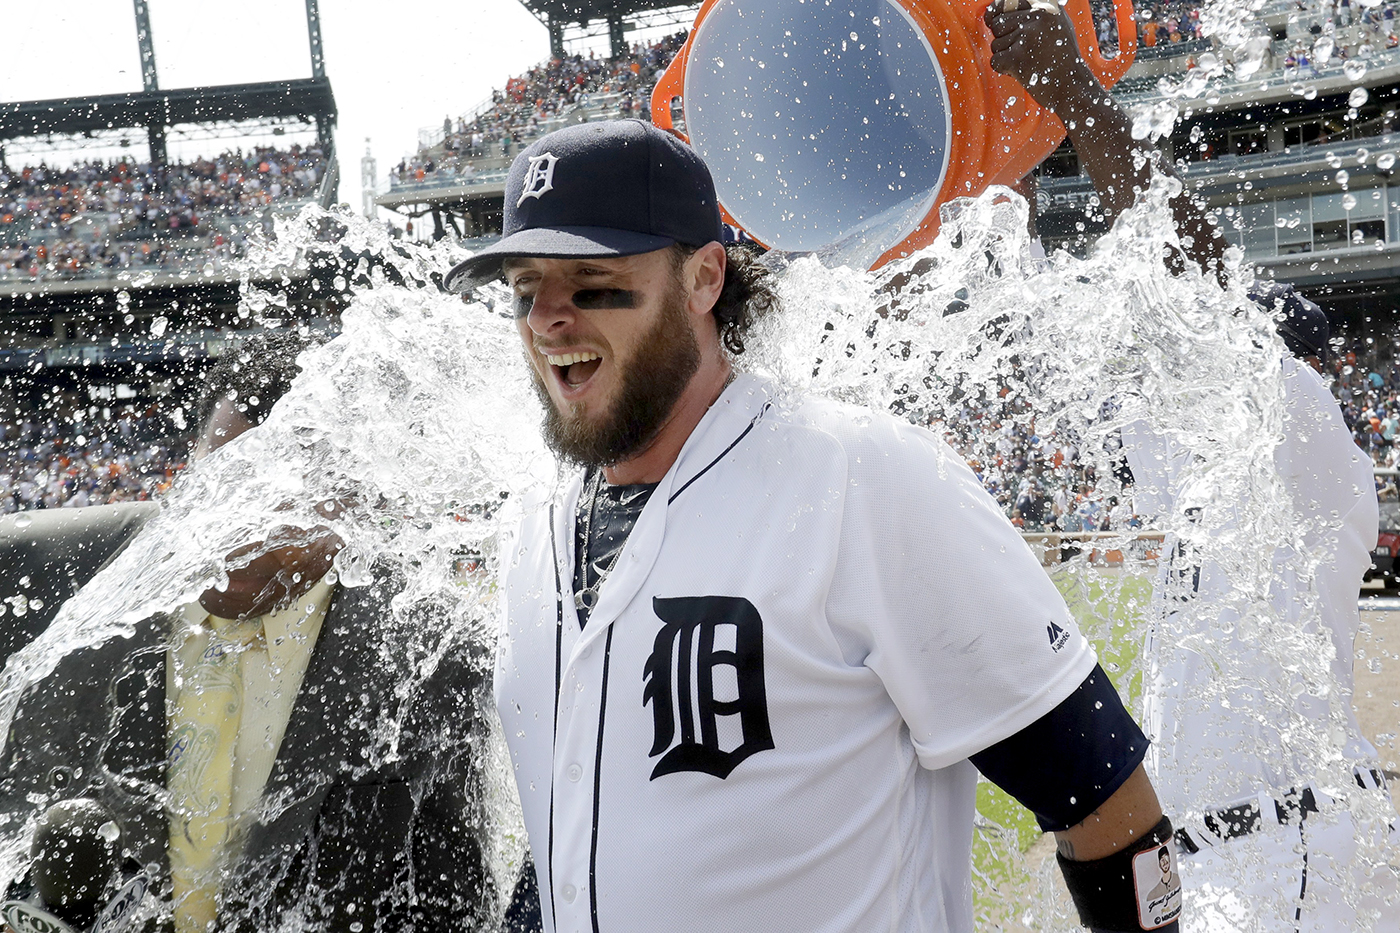 Detroit Tigers' Jarrod Saltalamacchia is celebratorily doused during a post game interview